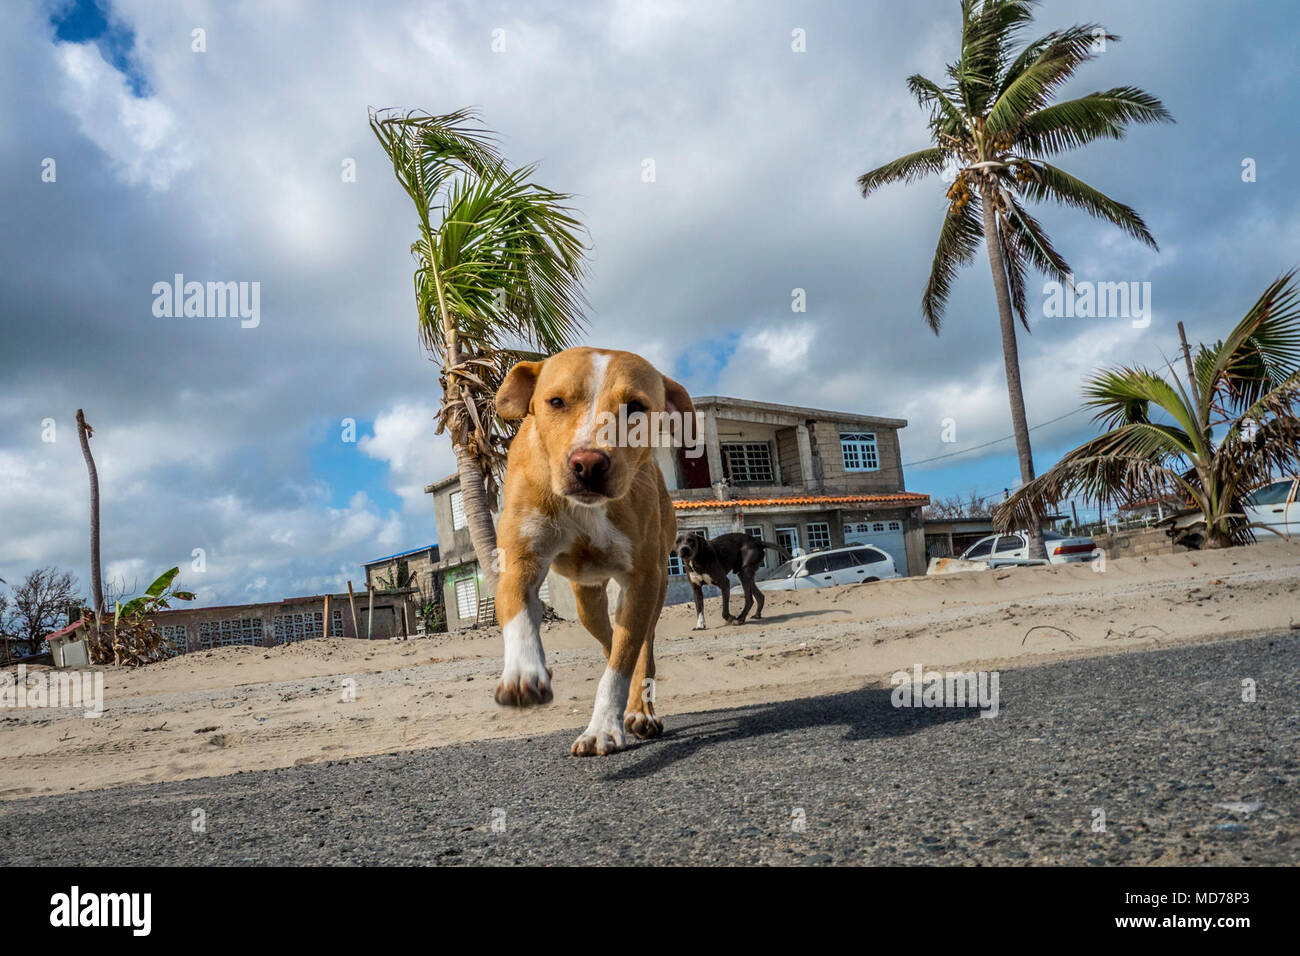 Like most of the island residents, those who live in the coastal town of Loiza, Puerto Rico still finds themselves cleaning up after the storms. Not only did Hurricane Maria damaged the town, but it destroyed the natural barriers that keep the waters from rising and continually damaging the coast roads. Stock Photo